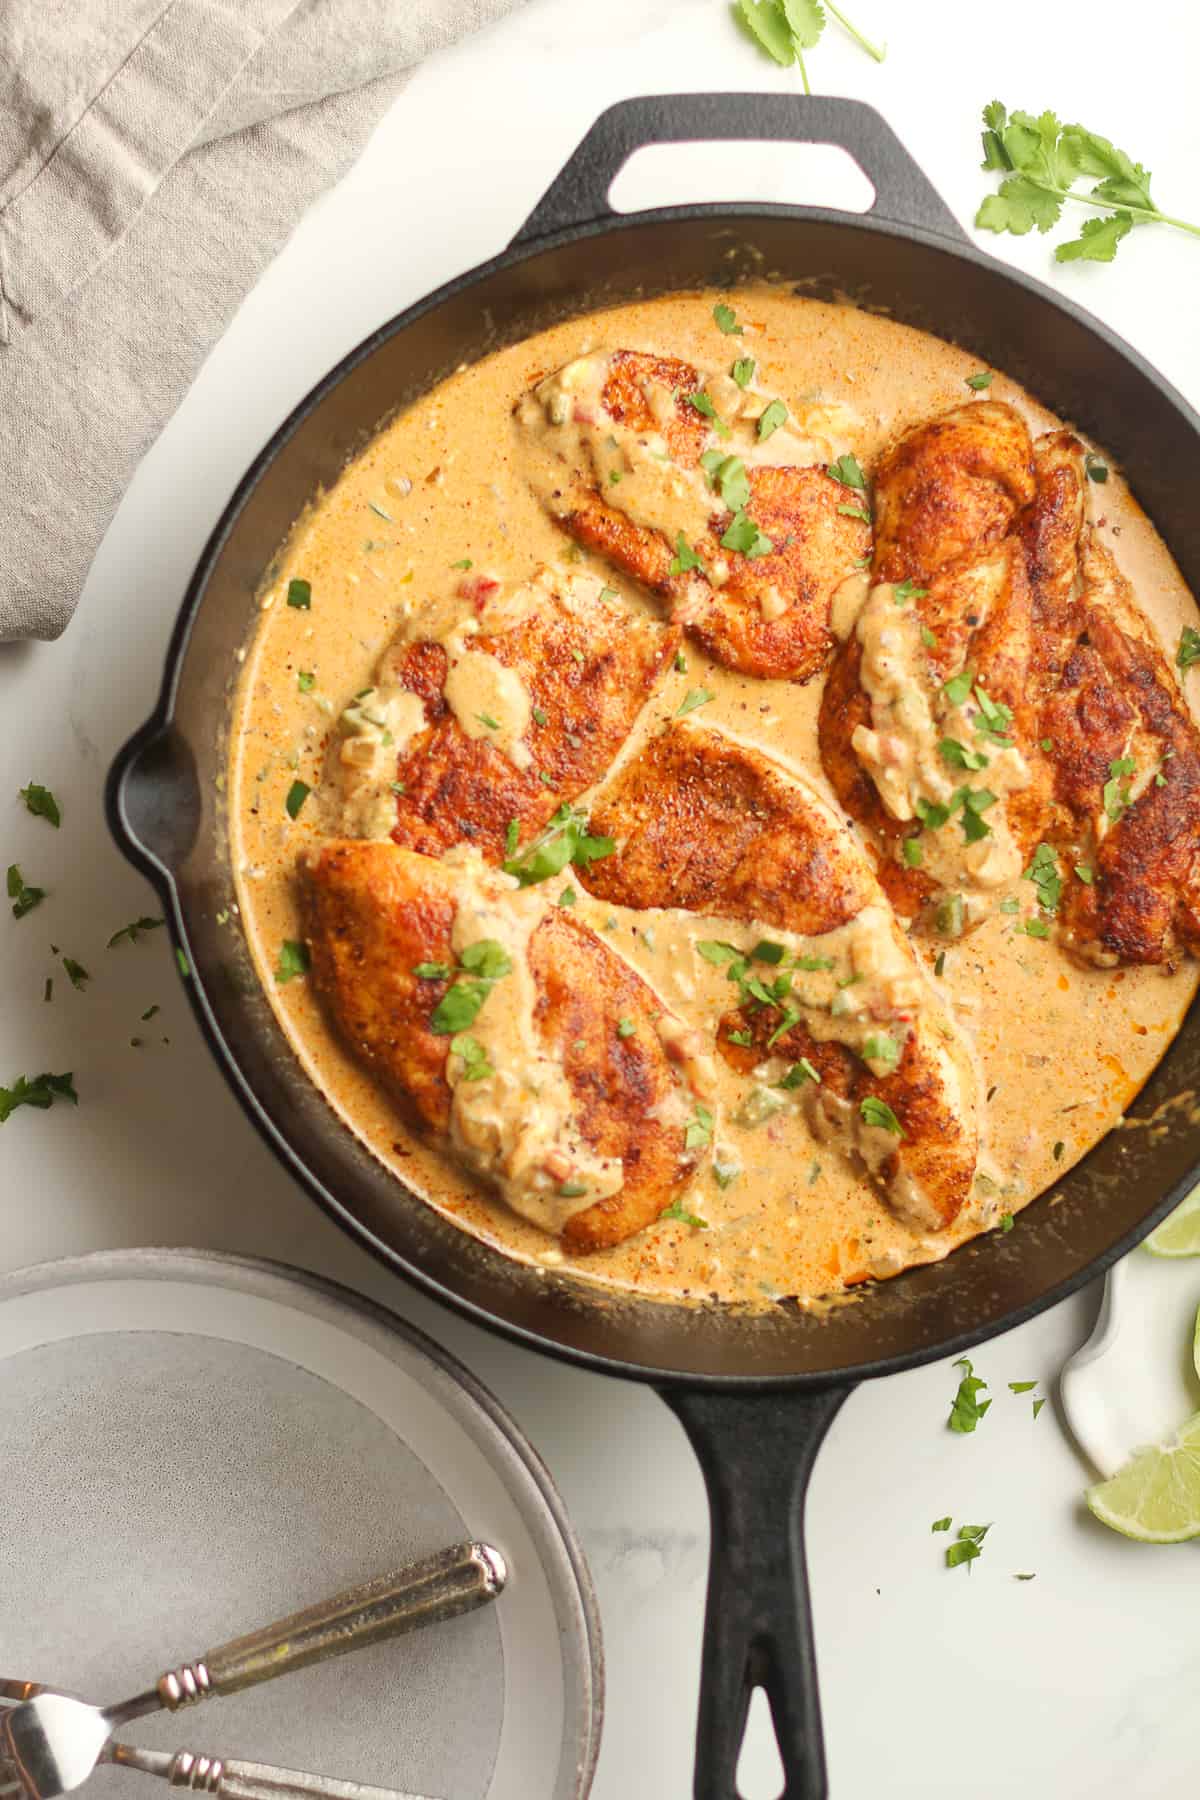 The cast iron skillet with the creamy jalapeño chicken.